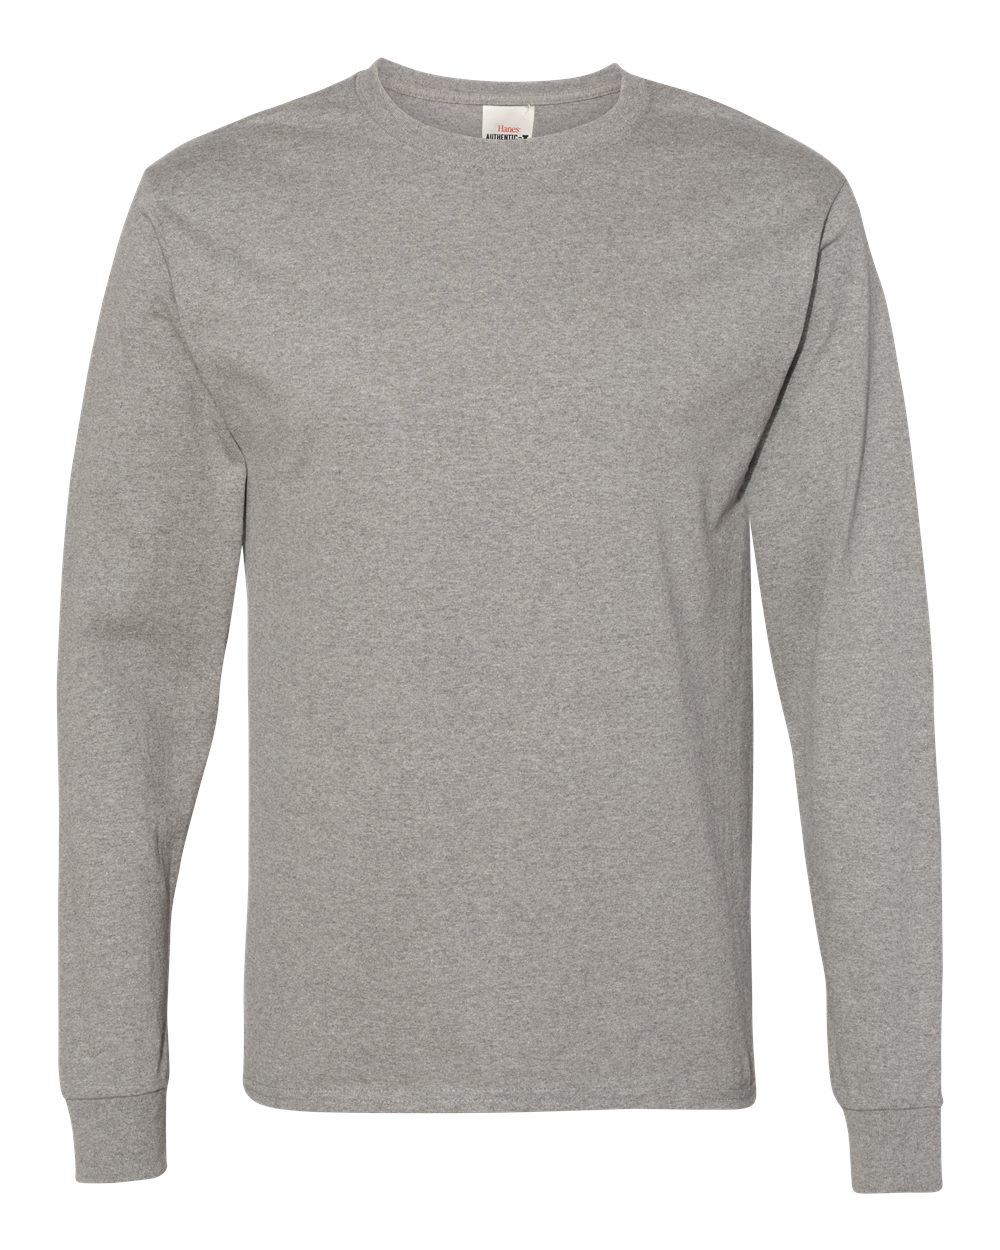 Hanes 5586 - Adult Authentic Long-Sleeve T-Shirt $6.28 - T-Shirts